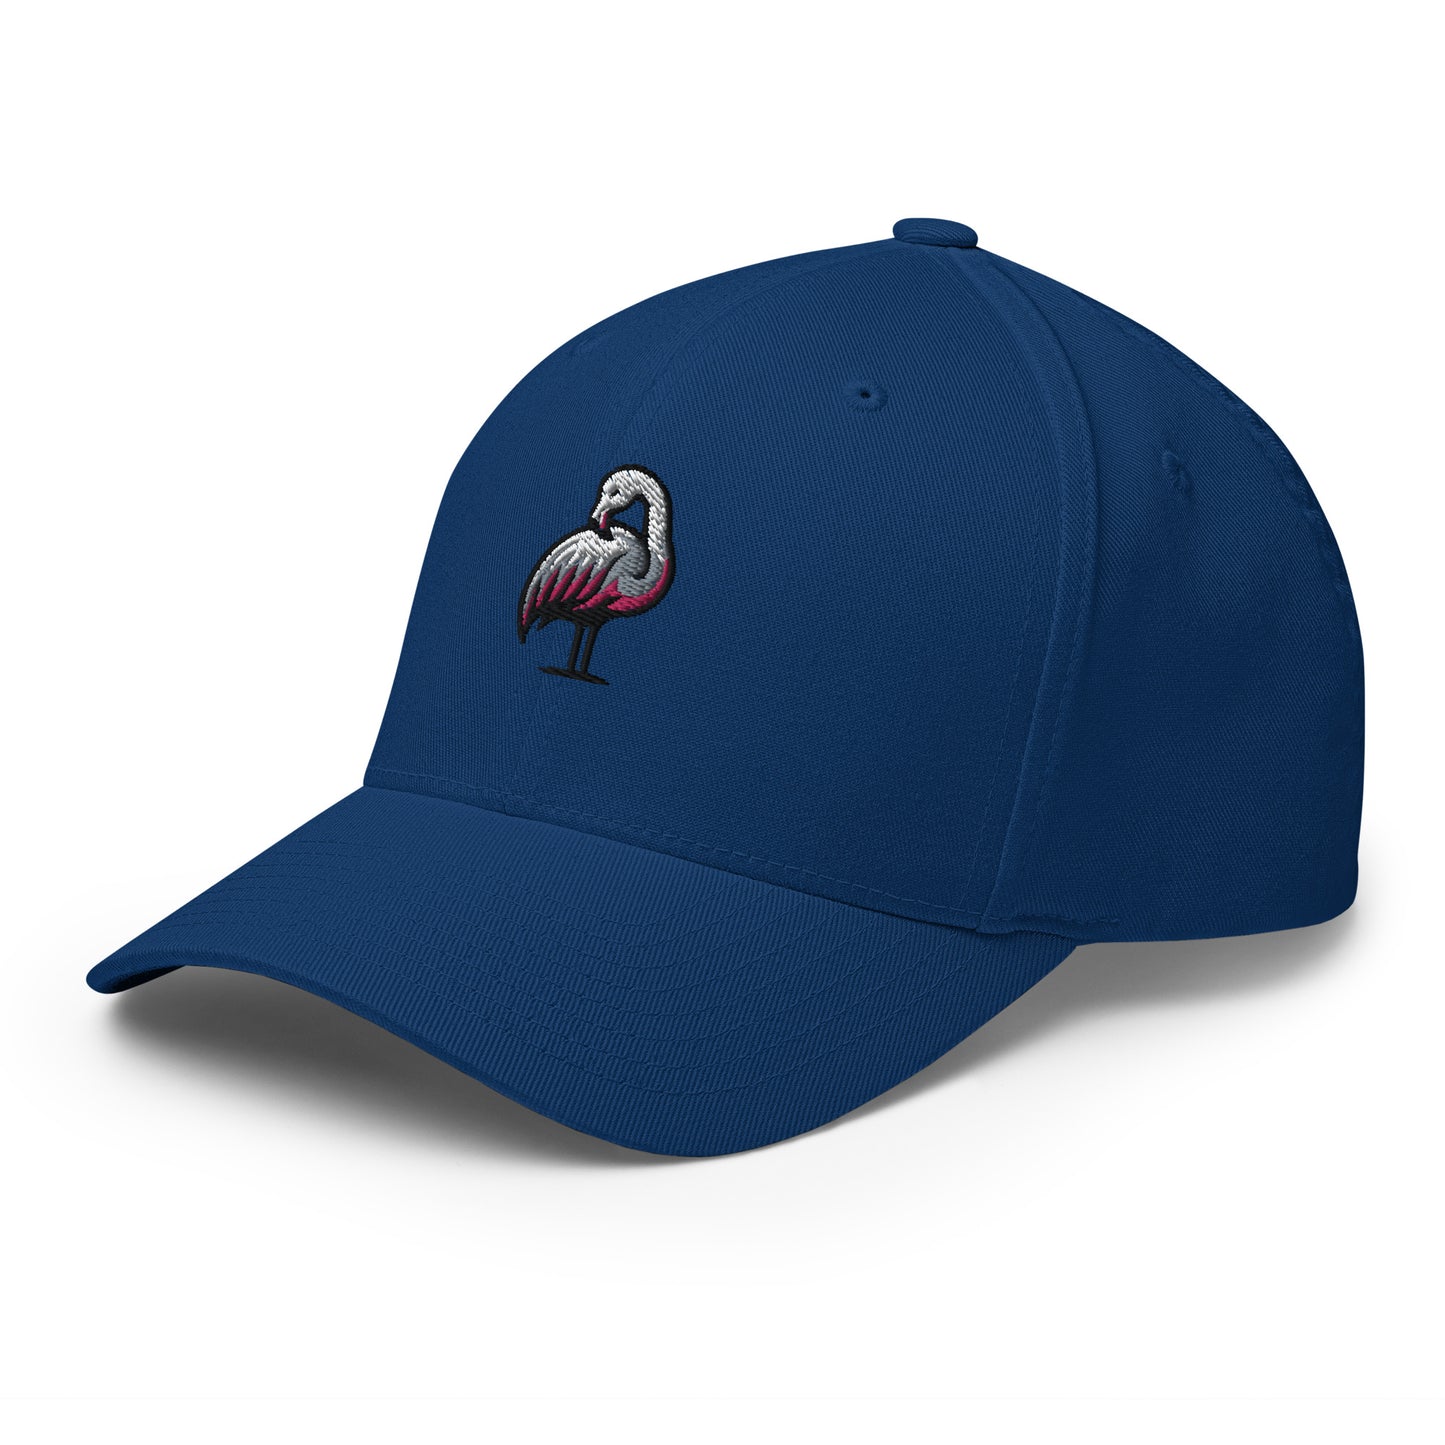 cap-from-the-front-with-flamingo-symbol